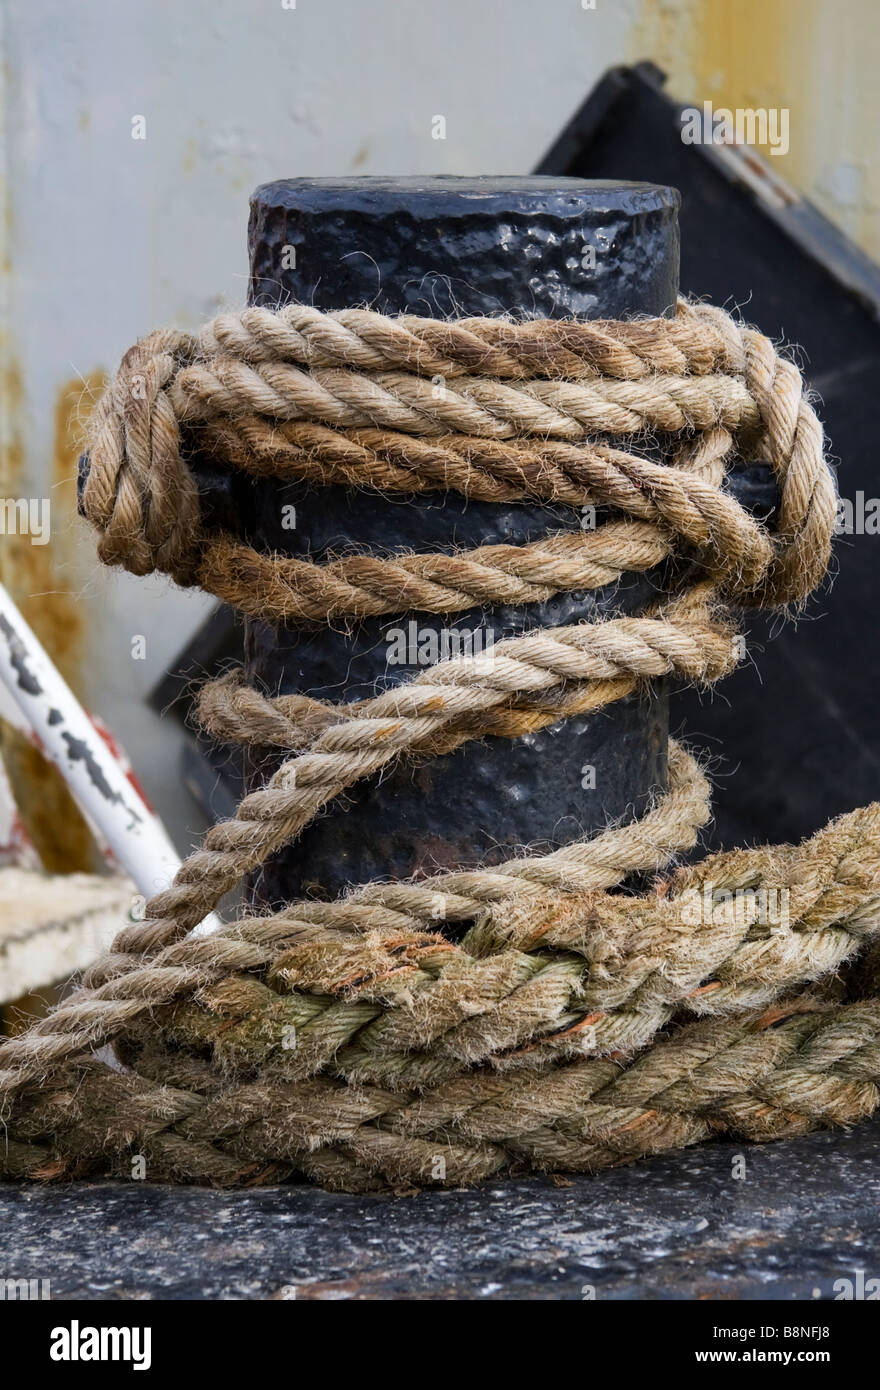 https://c8.alamy.com/comp/B8NFJ8/an-anchor-rope-tied-to-a-cleat-securing-a-boat-to-the-harbour-B8NFJ8.jpg